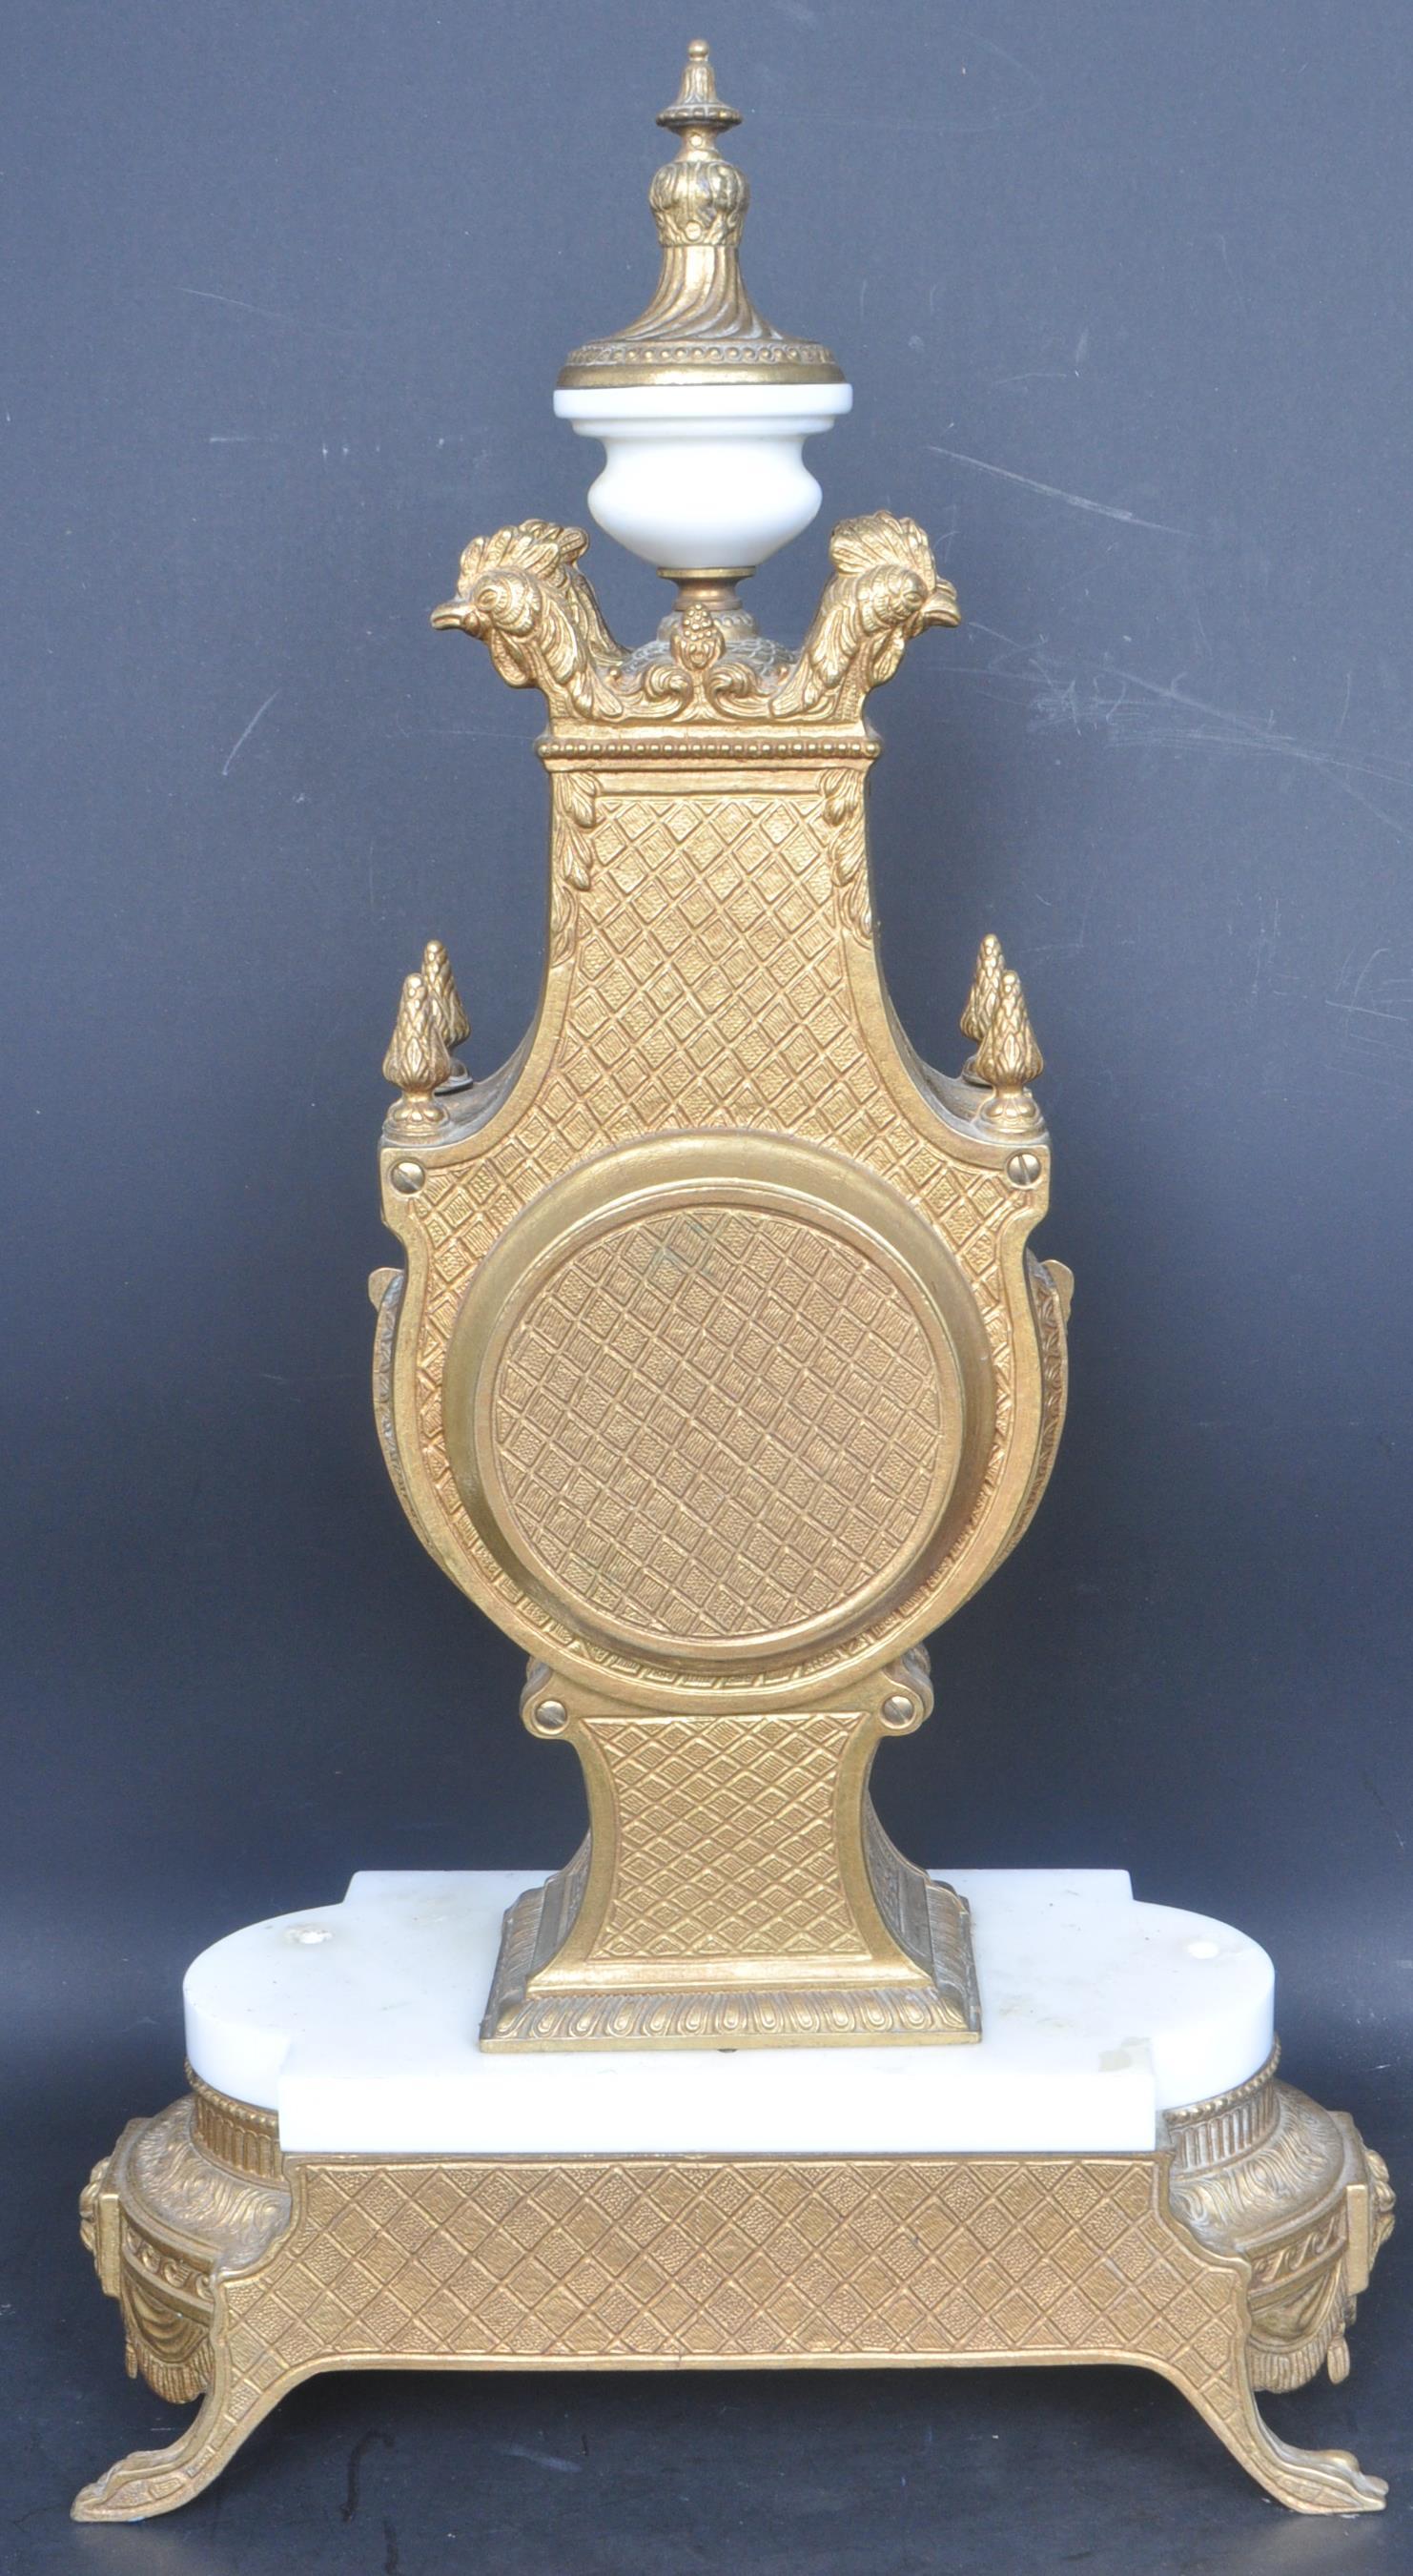 EARLY 20TH CENTURY GERMAN CONTINENTAL BRASS AND MARBLE CLOCK - Image 7 of 7